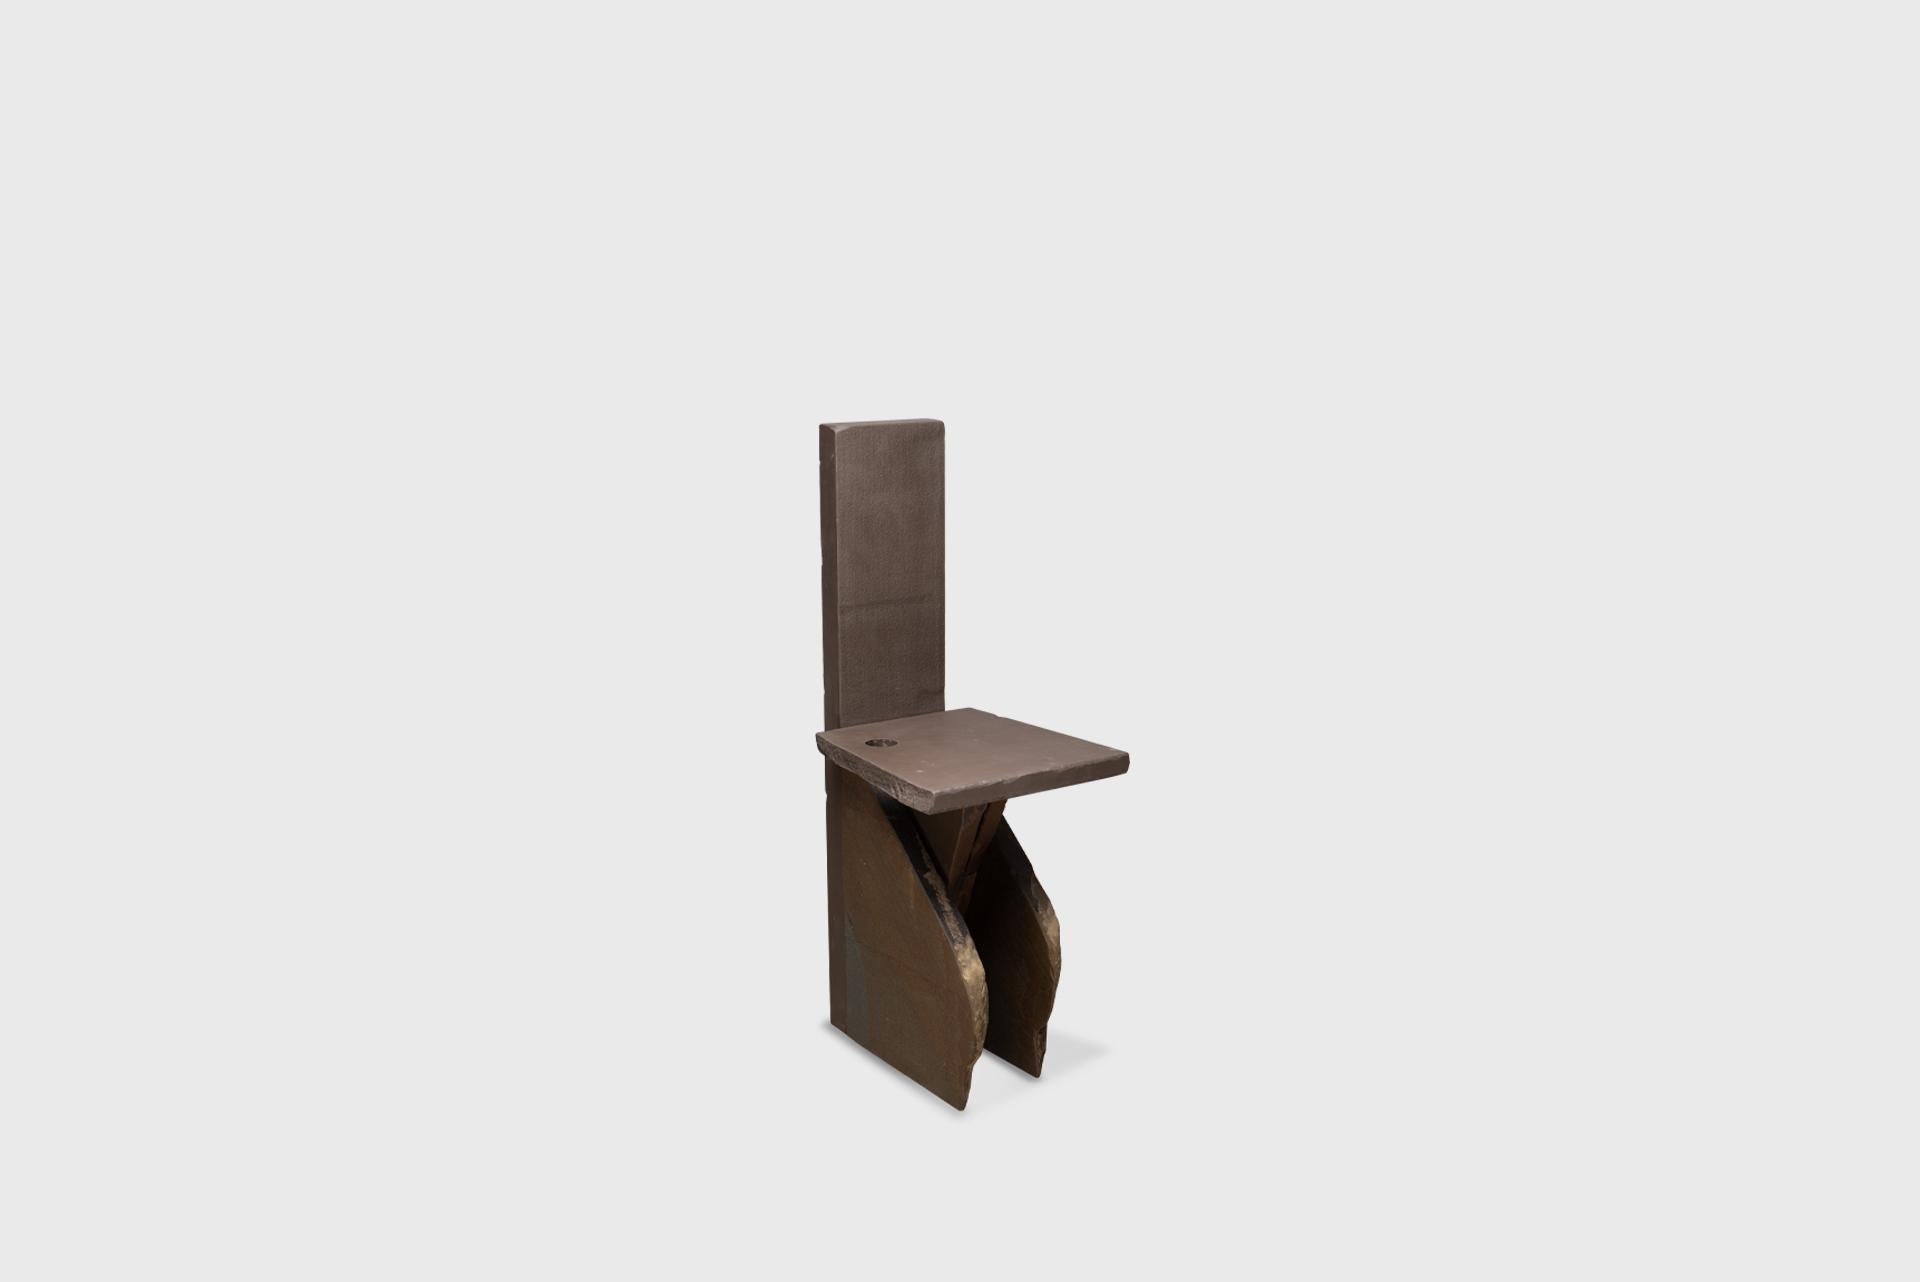 Contemporary Natural Chair 23, Graywacke Offcut Gray Stone, Carsten in Der Elst For Sale 2